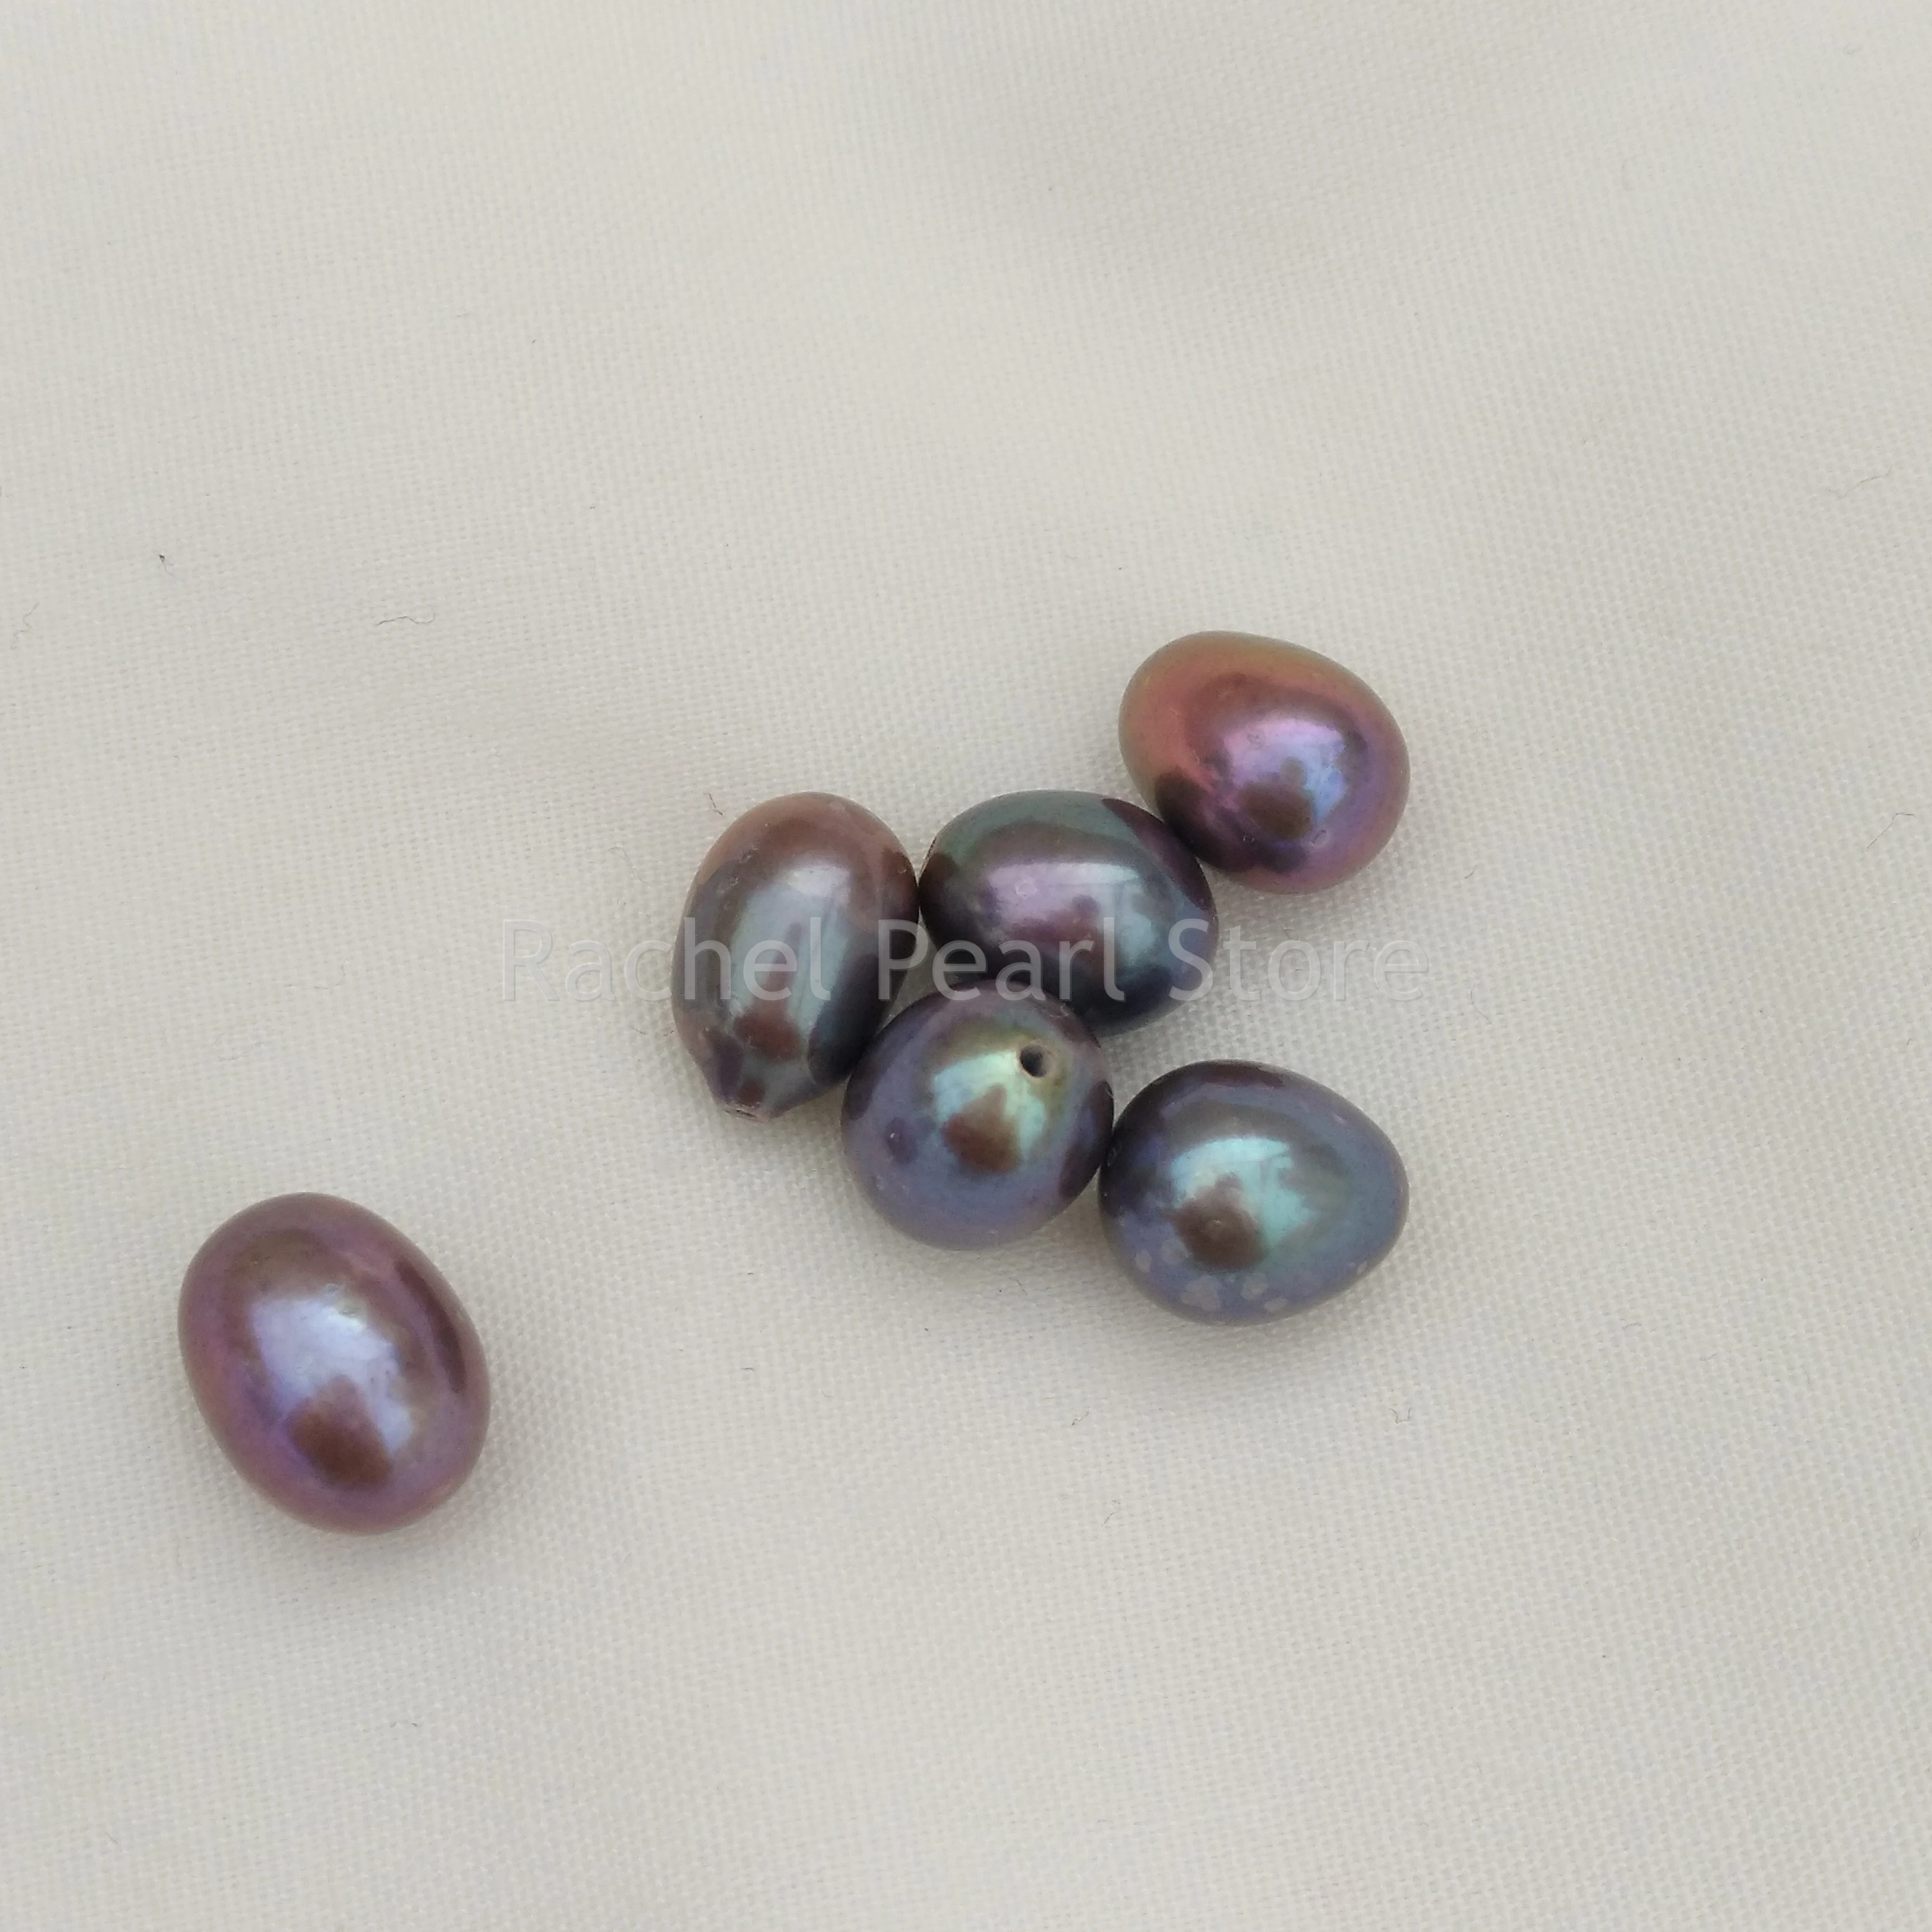 

6pc Exceptional Fine 6-8mm 7-9mm Real Natural Aaaa Tahitian Black Baroque Rice Loose Pearl Diy Ring Pendant Free Shipping